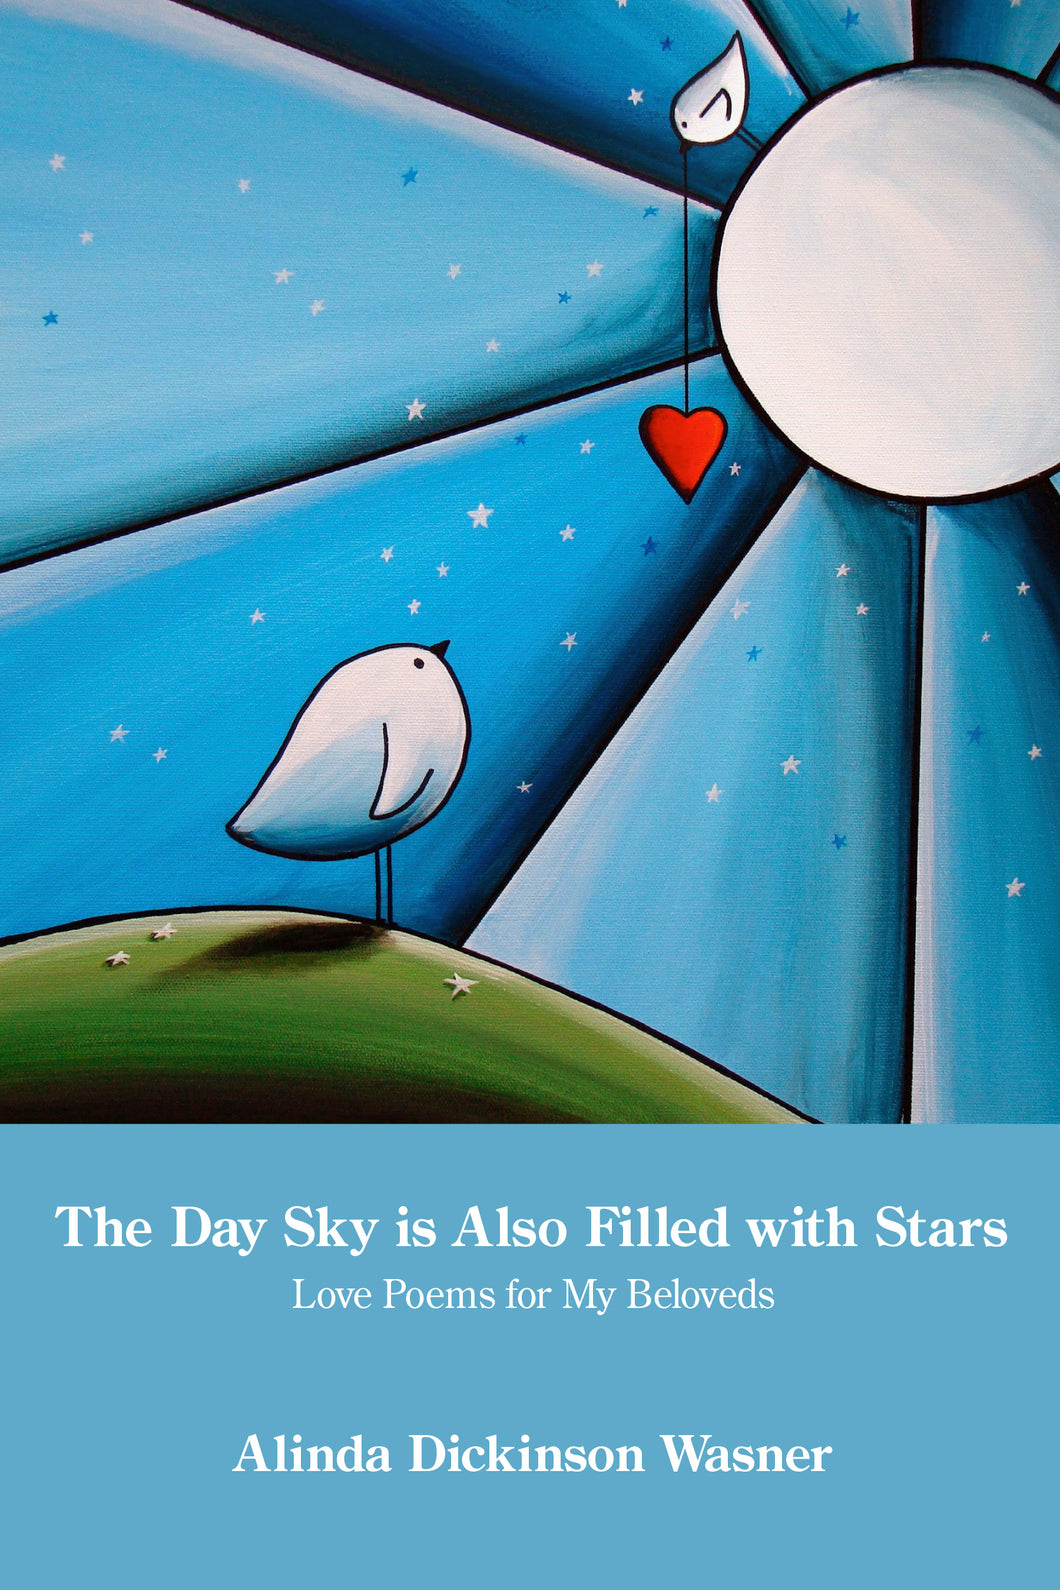 The Day Sky Is Also Filled with Stars